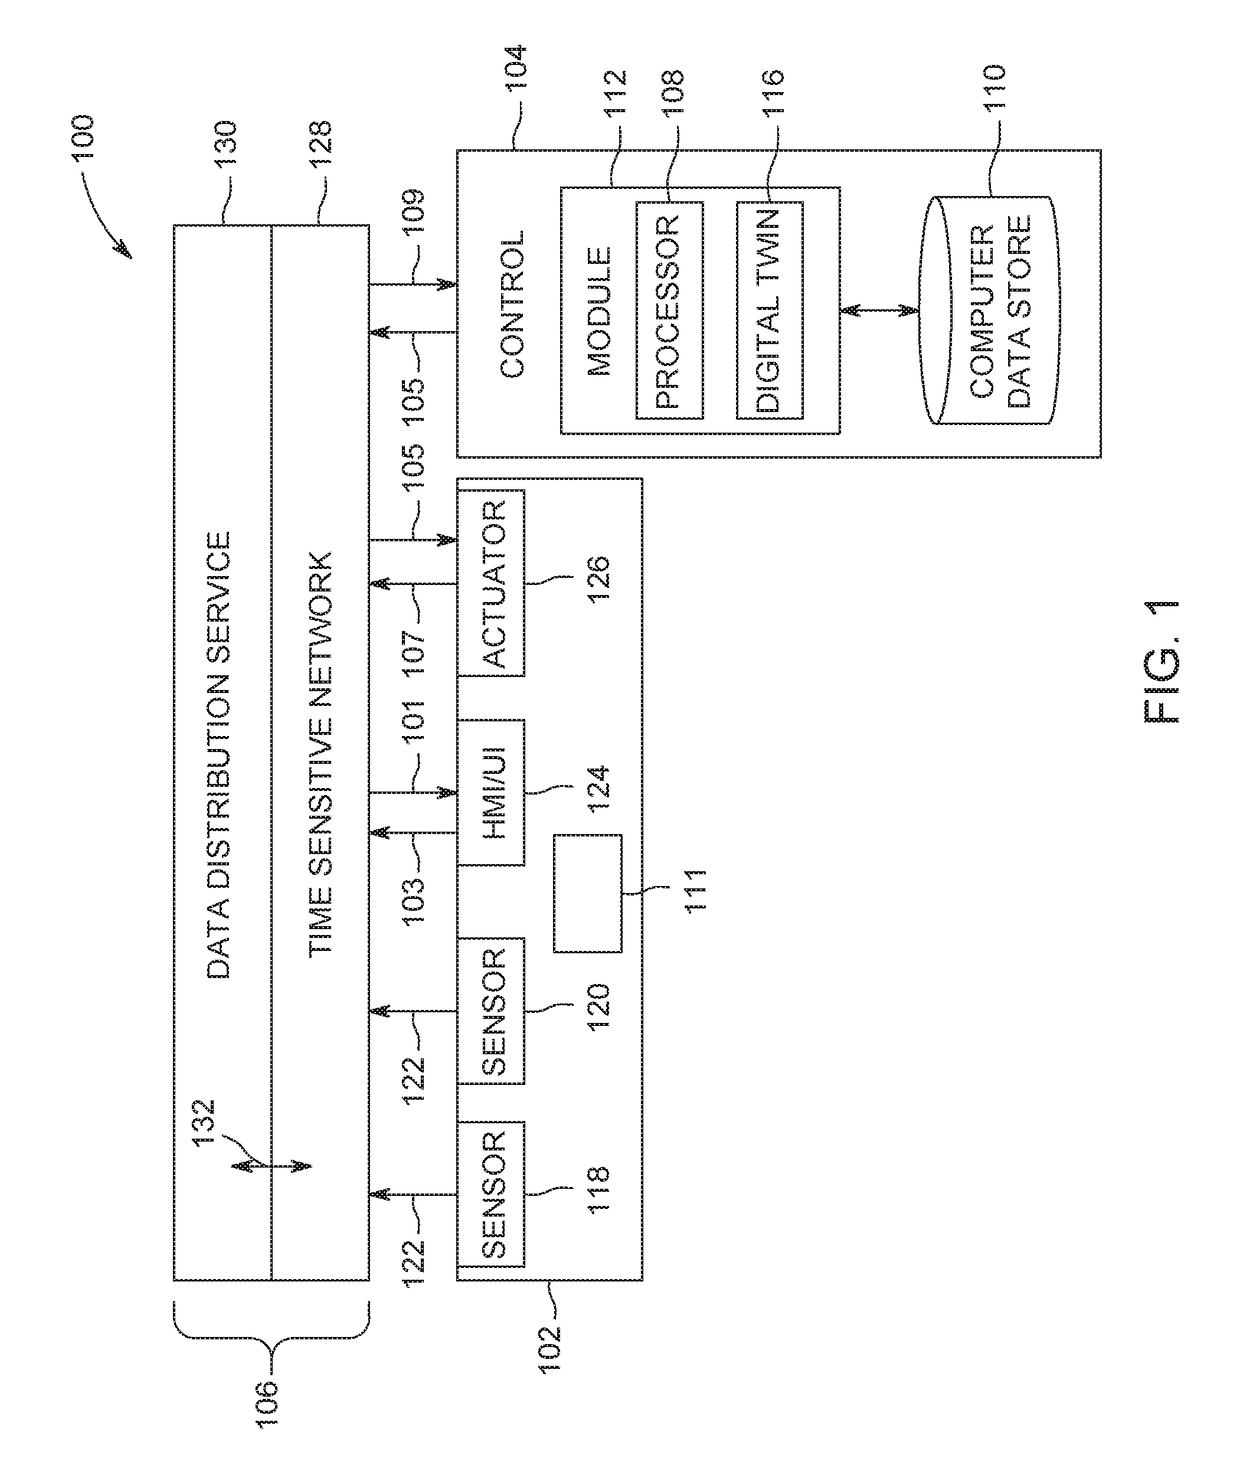 Time-sensitive networking differentiation of traffic based upon content